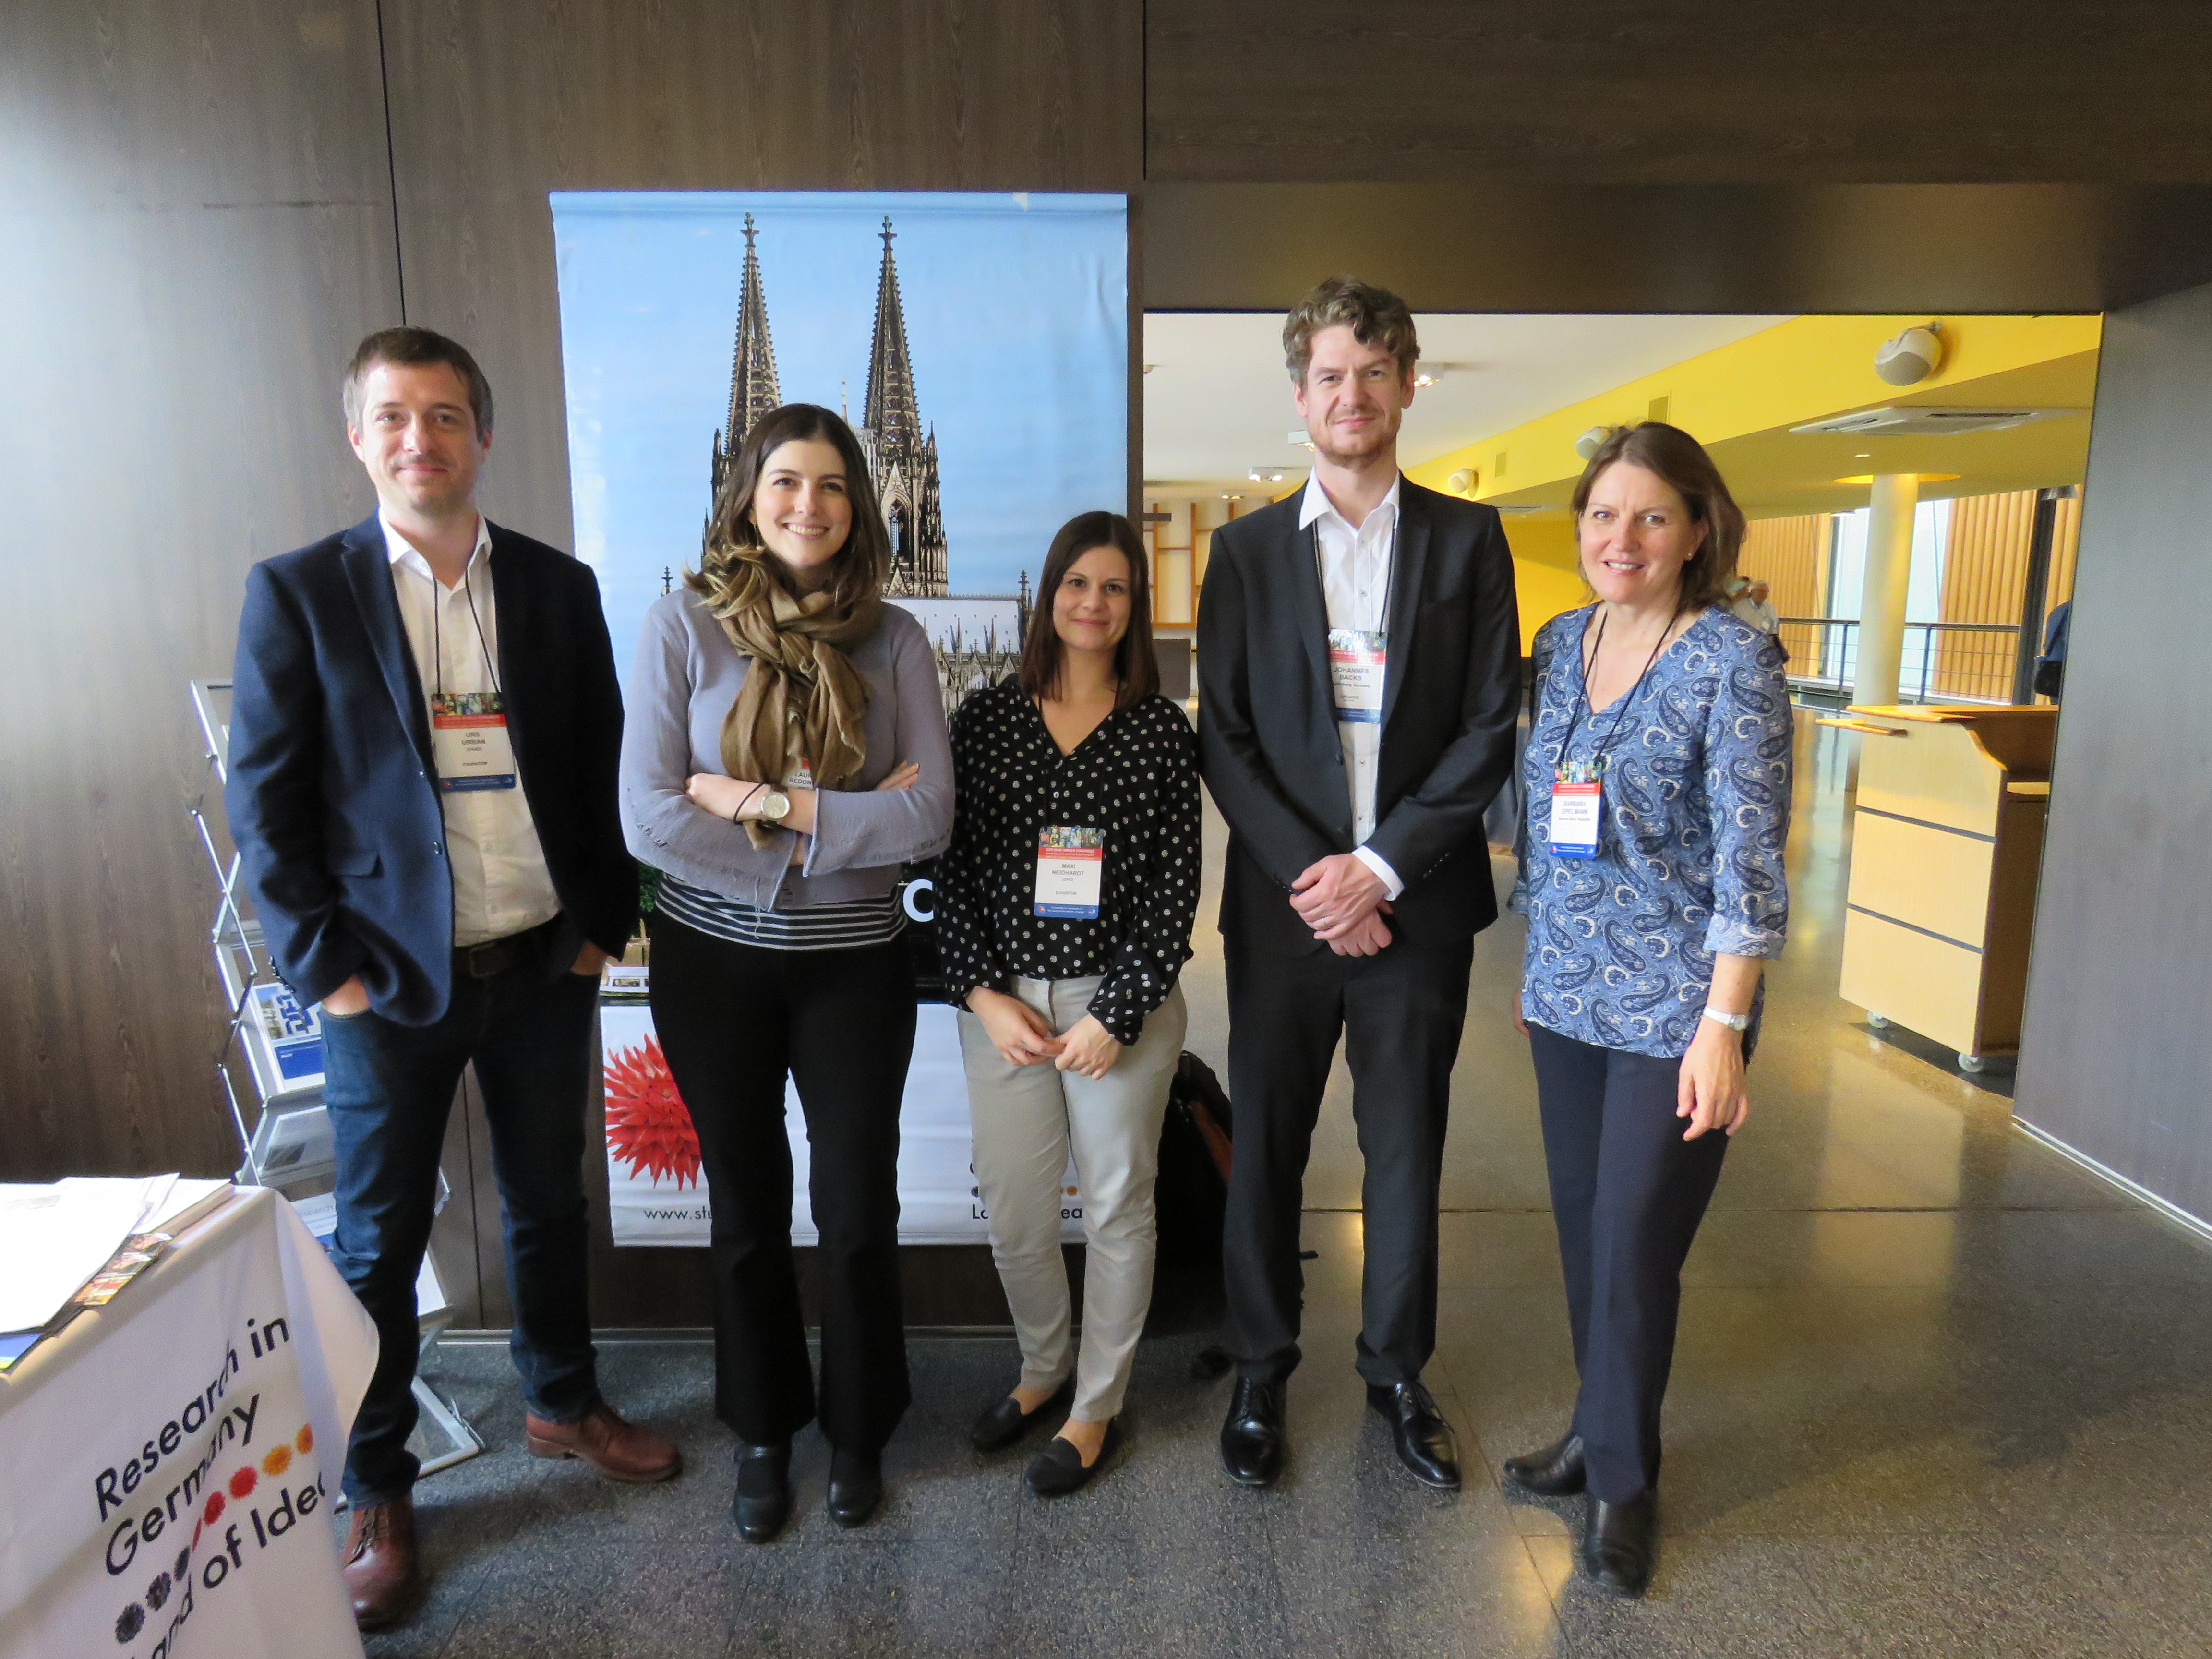 Group photo at the "Research in Germany" information table (from left to right): Dr. Urs Urban (DAAD), Laura Redondo and Maxi Neidhardt (DFG), Professor Dr. Johannes Backs (Heidelberg University Hospital) and Dr. Barbara Spielmann (MPG).